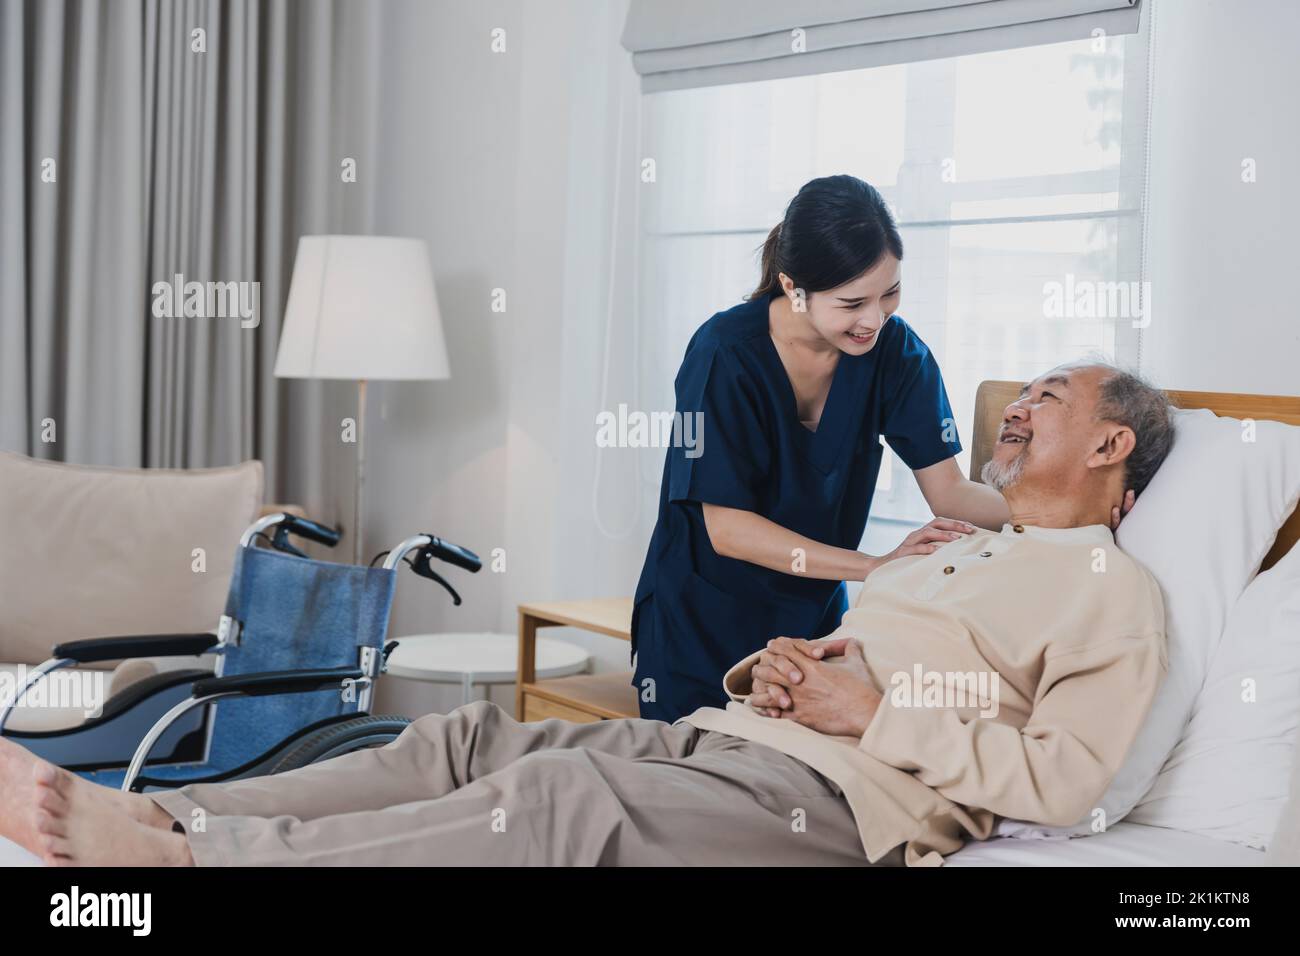 Senior Asian man laying on bed receives medical help for injury by Asian nurse, doctor woman assisting Stock Photo